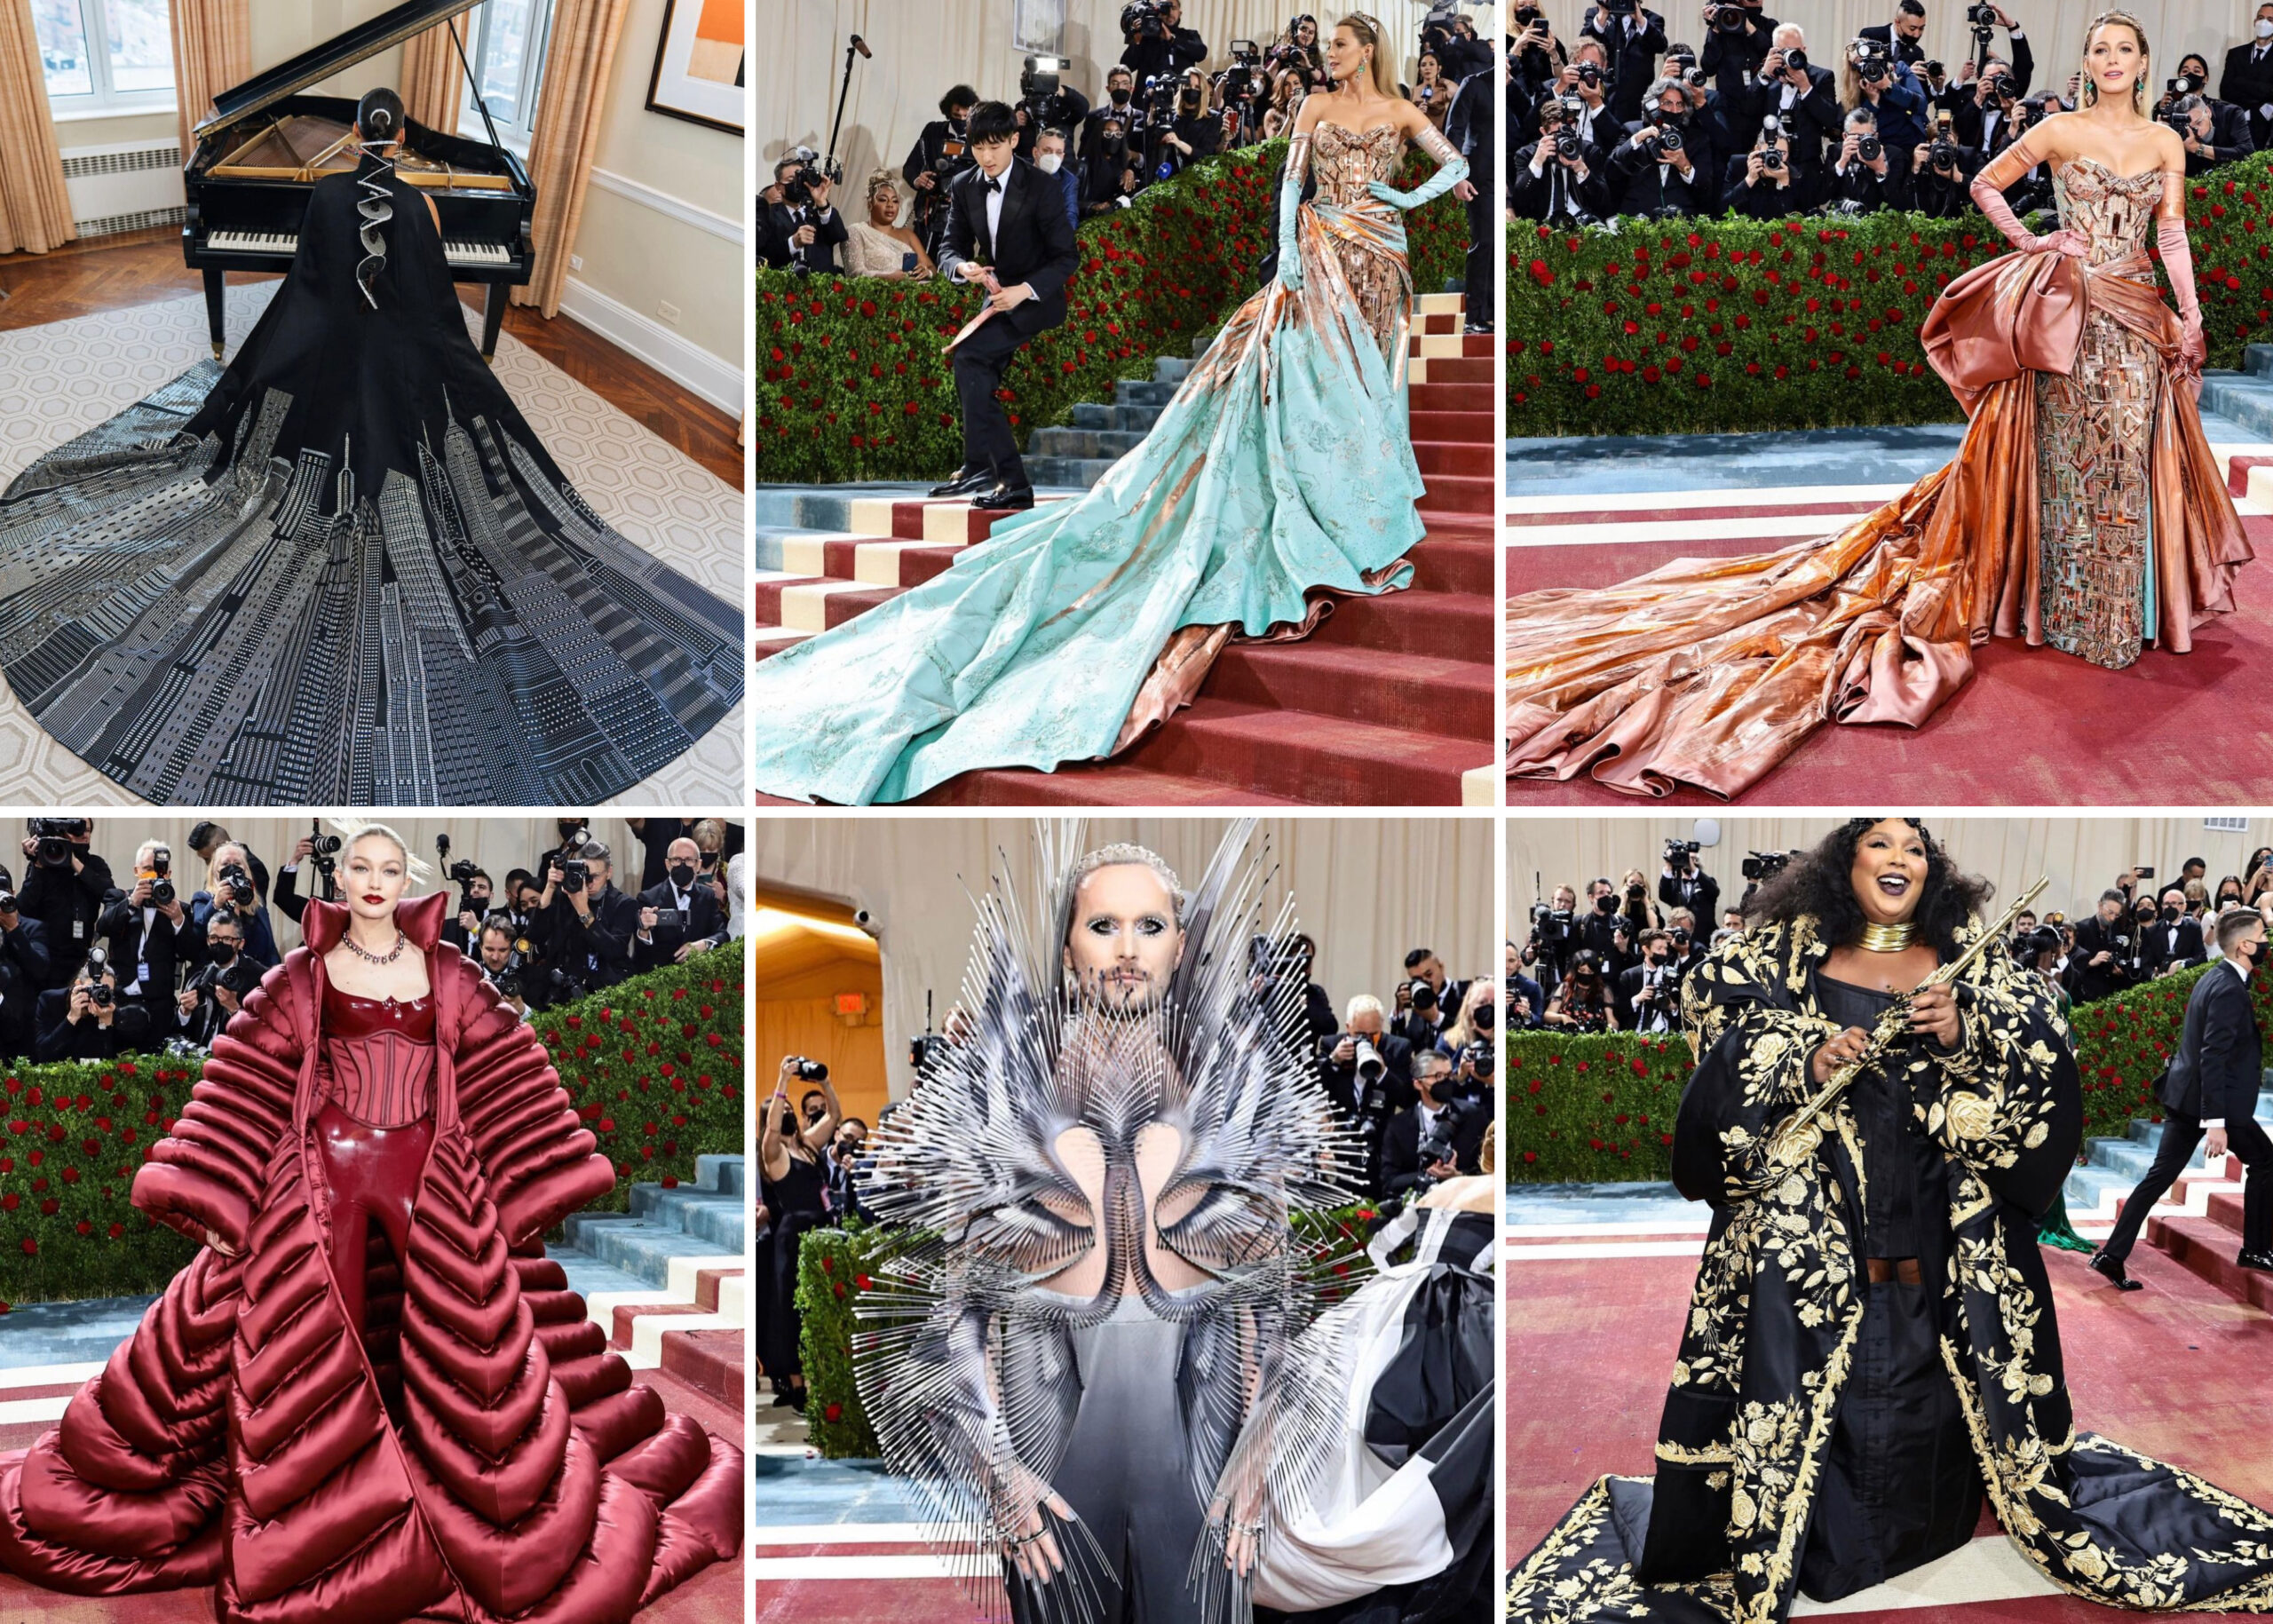 Met Gala 2022: Red Carpet Looks From Fashion Biggest’s Night